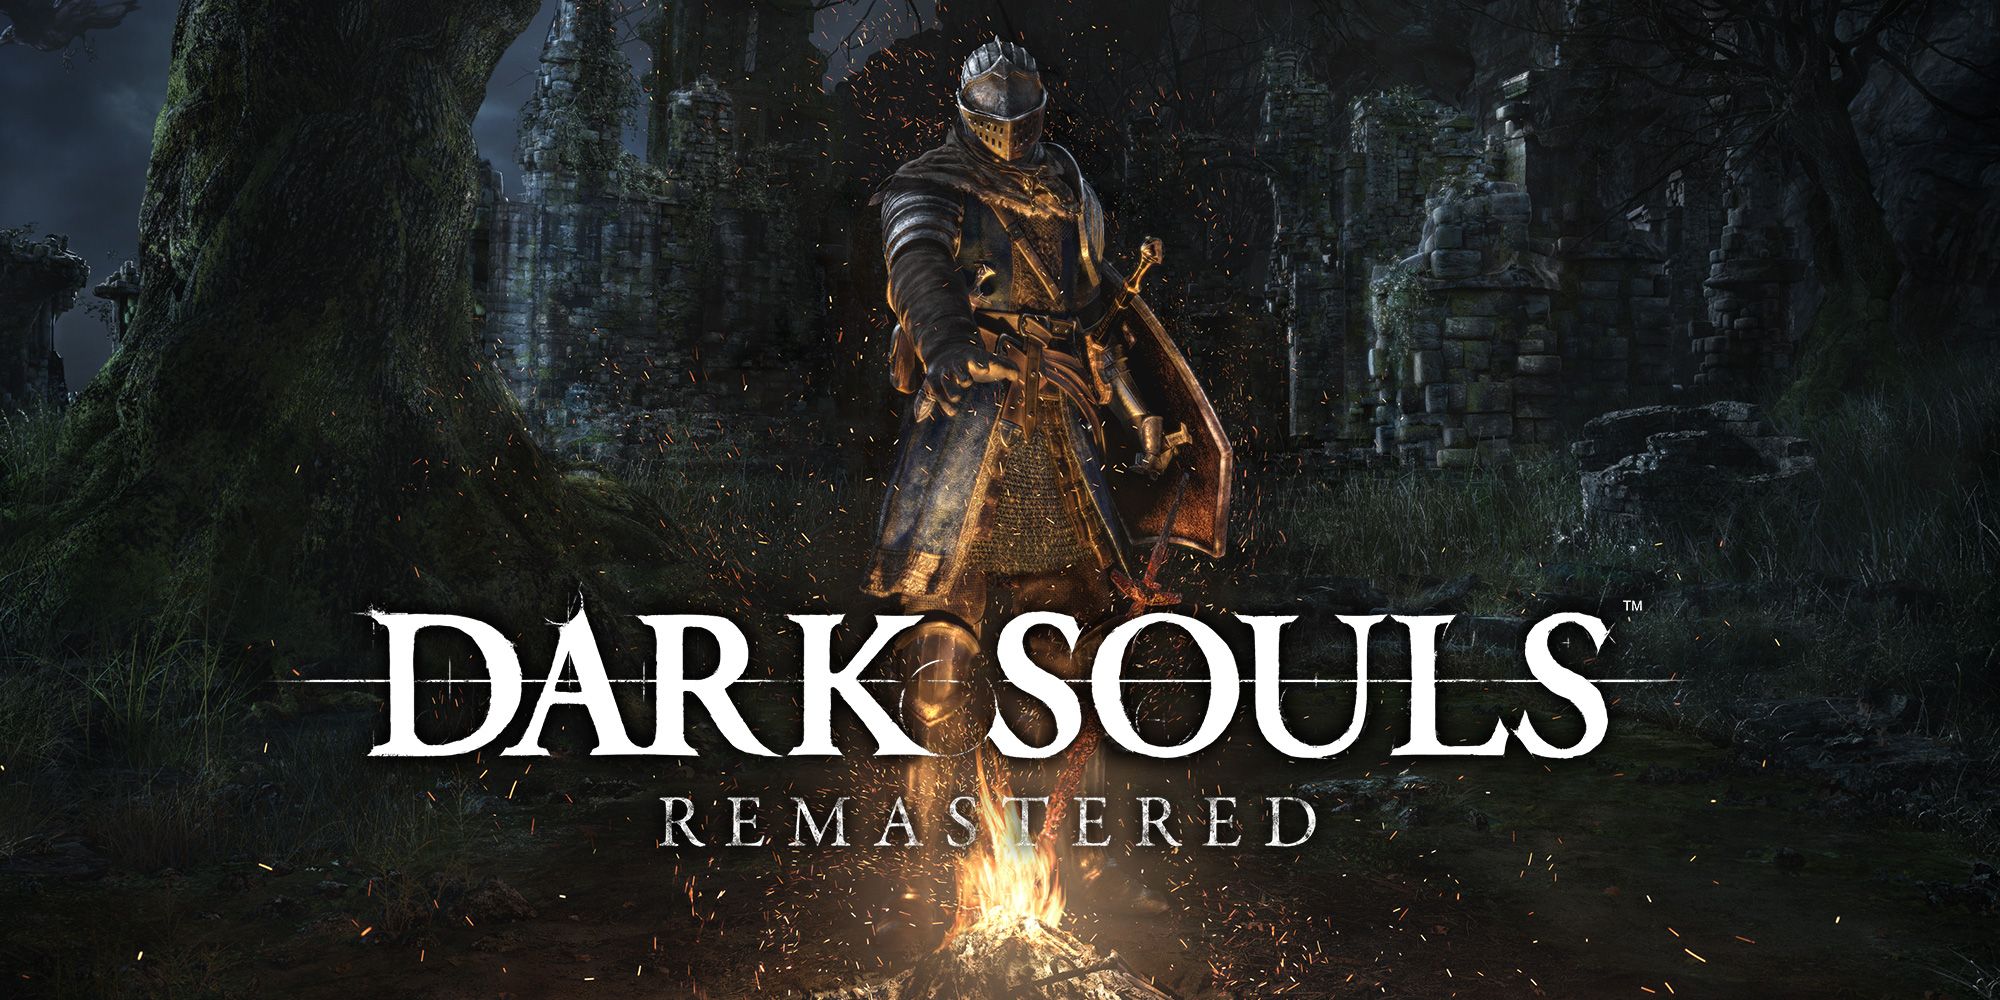 Cover Art of Dark Souls Remastered, with the player lighting a bonfire and the title of the game at the bottom of the image